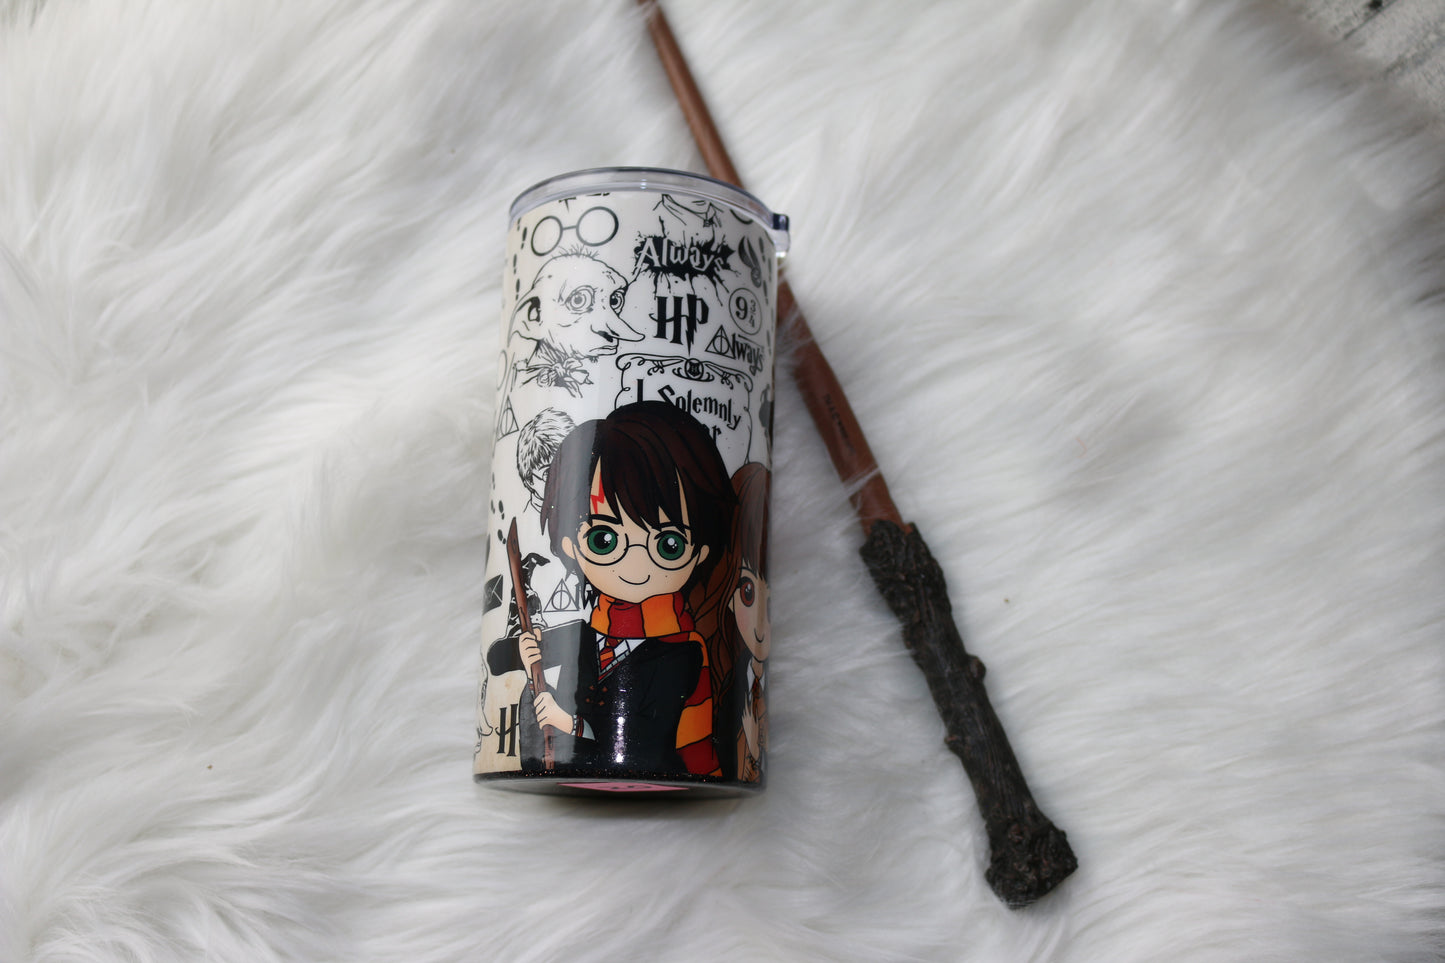 16 oz "Wizarding World" Stainless Steal Tumbler